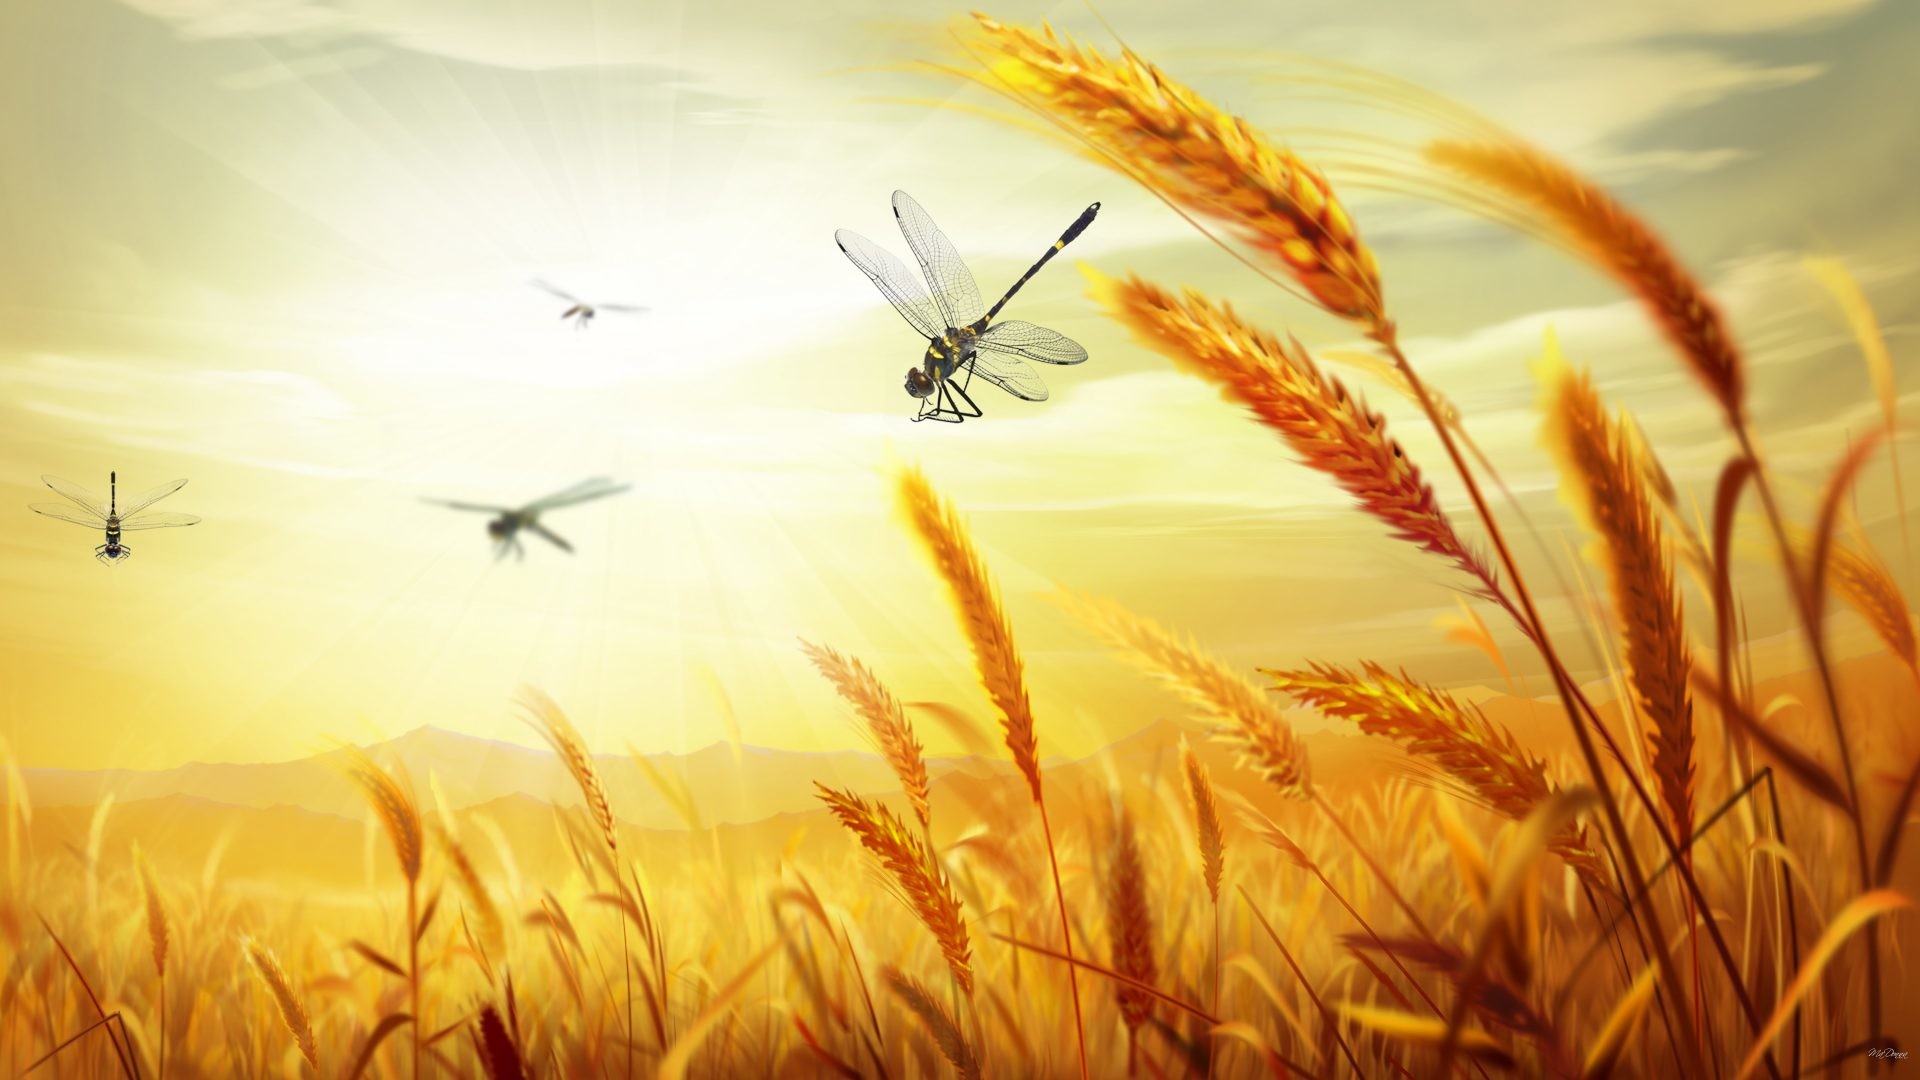 1920x1080 Harvest Tag - Country Field Dragonflies Agriculture Wheat Gold Farm Sky  Grass Bread Grain Harvest Oats